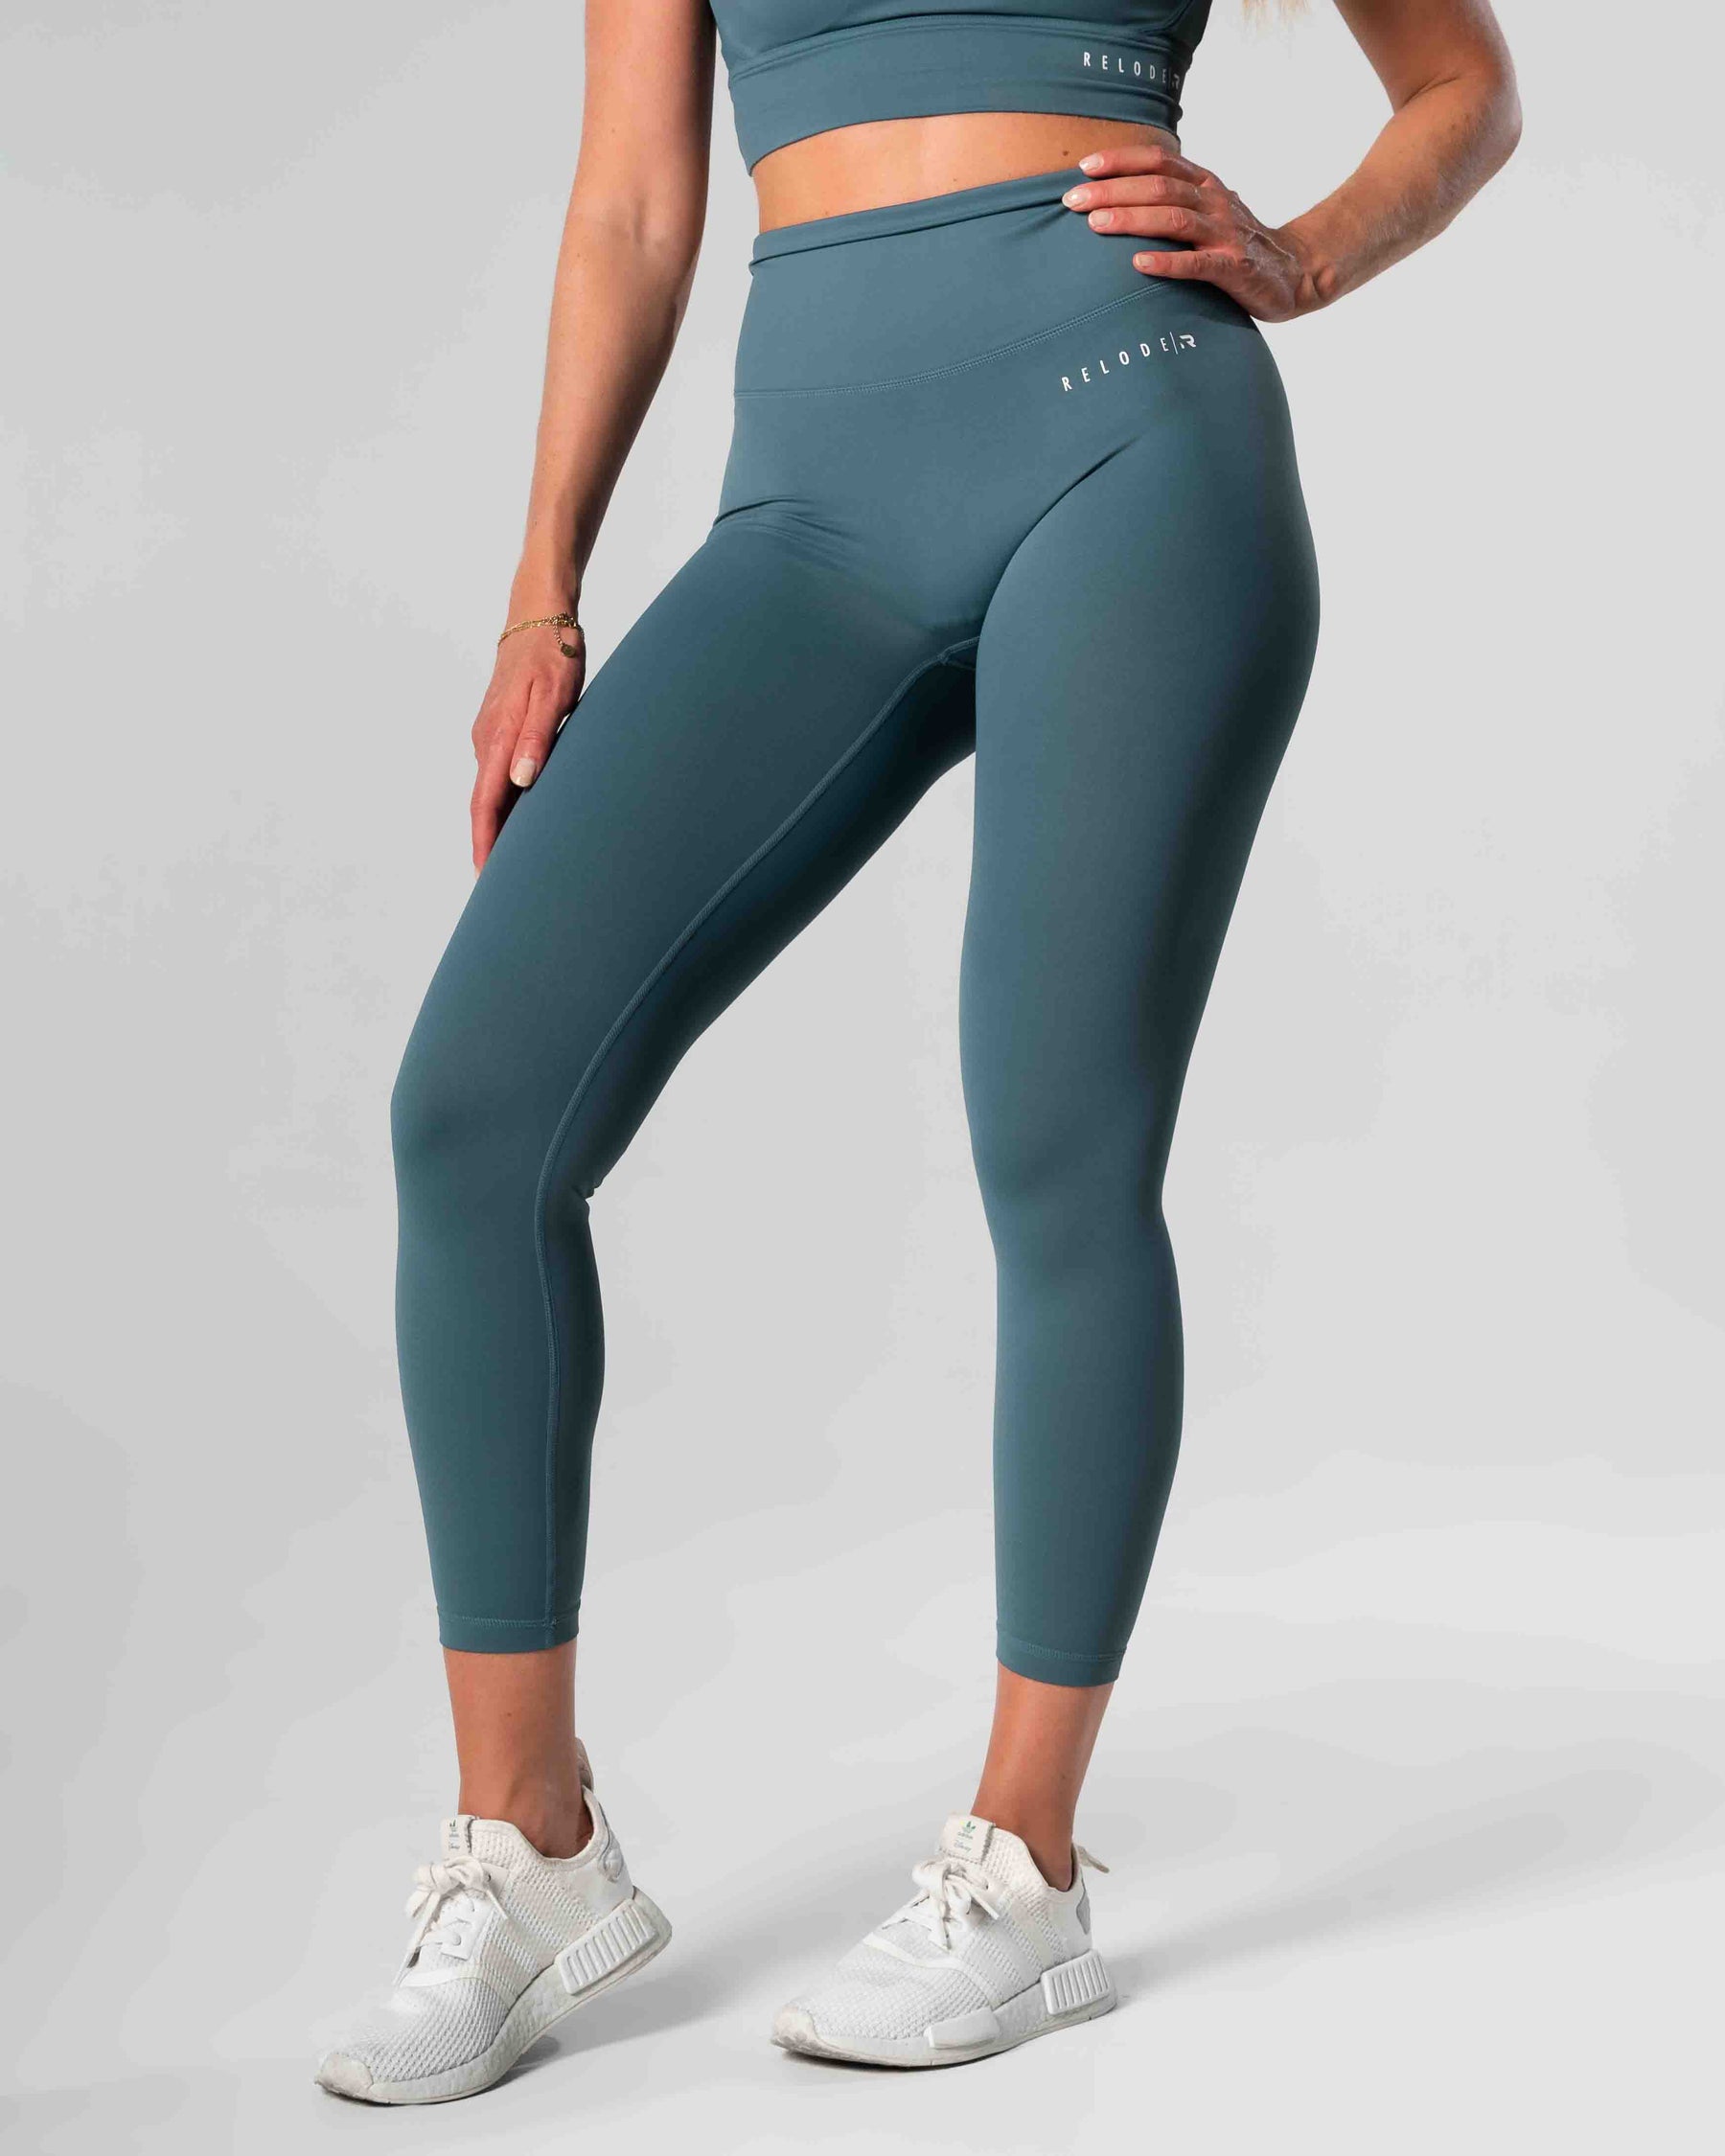 Mercy Tights - Teal Green